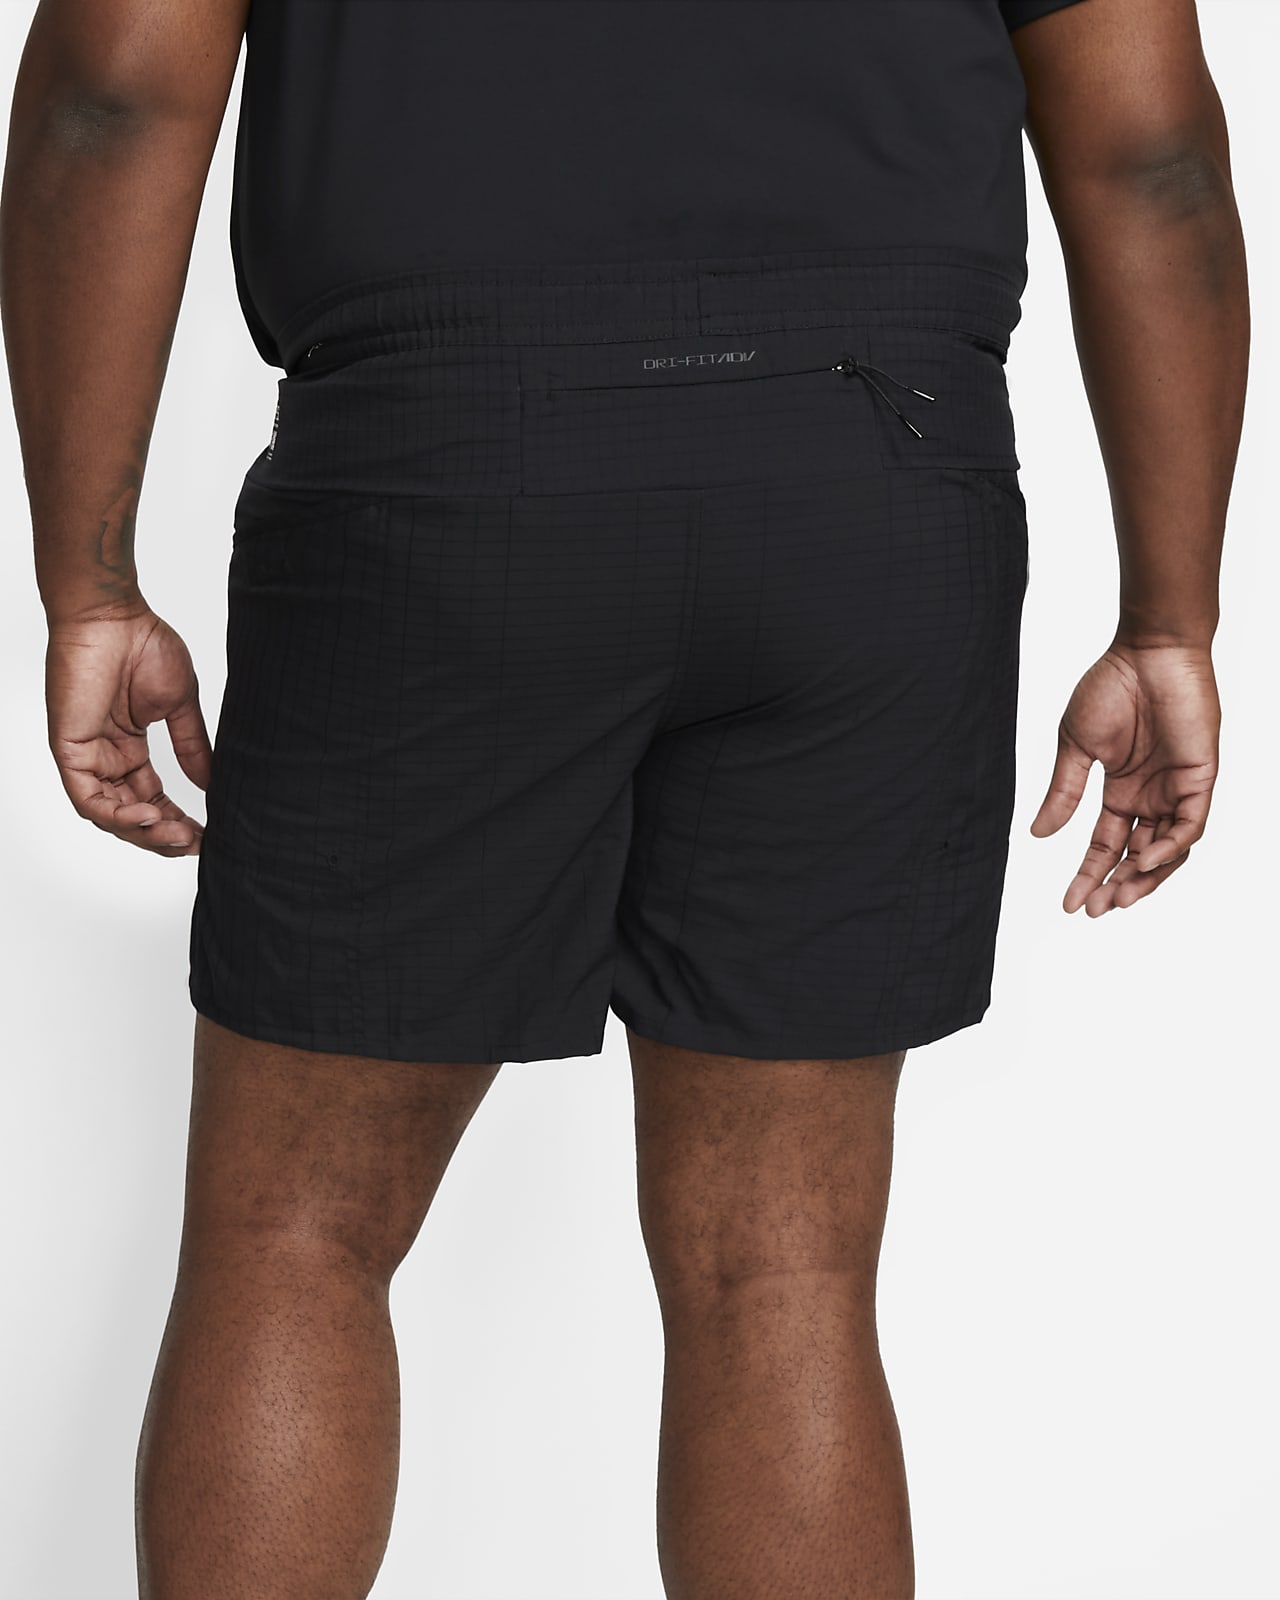 Nike Dri-FIT Solid Small Label Breathable Quick Dry Running Training Shorts  Black 'Multi-Color' - DM4760-010